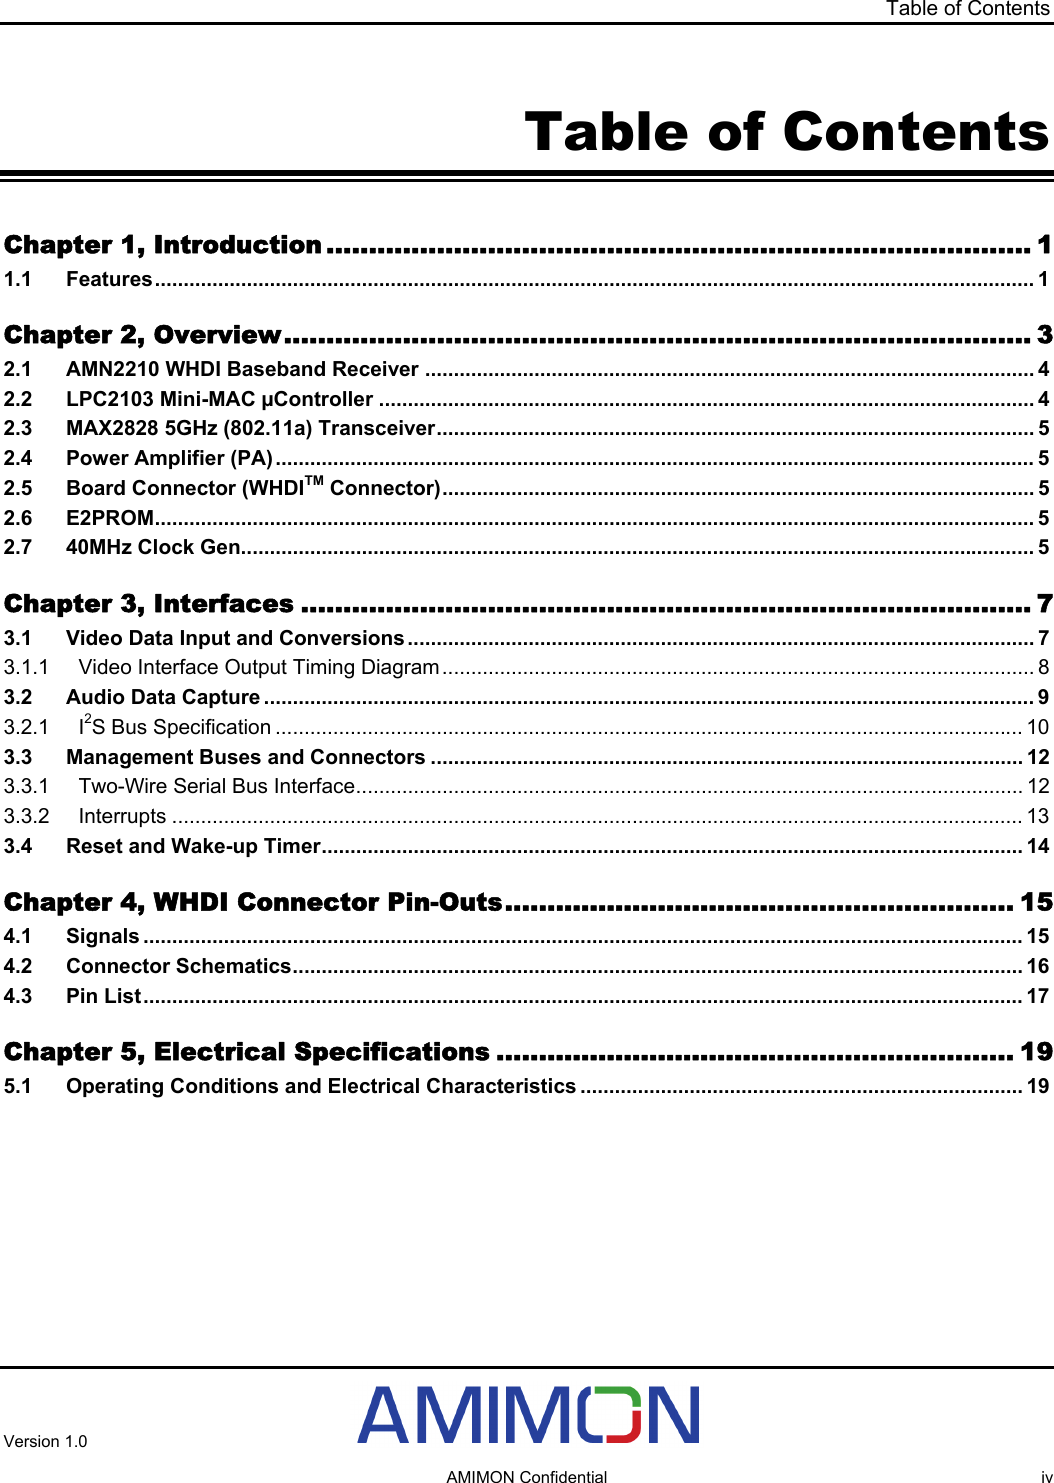 Table of Contents Table of Contents Chapter 1, Introduction ................................................................................... 1 1.1 Features......................................................................................................................................................... 1 Chapter 2, Overview........................................................................................ 3 2.1 AMN2210 WHDI Baseband Receiver .......................................................................................................... 4 2.2 LPC2103 Mini-MAC µController .................................................................................................................. 4 2.3 MAX2828 5GHz (802.11a) Transceiver........................................................................................................ 5 2.4 Power Amplifier (PA).................................................................................................................................... 5 2.5 Board Connector (WHDITM Connector)....................................................................................................... 5 2.6 E2PROM......................................................................................................................................................... 5 2.7 40MHz Clock Gen.......................................................................................................................................... 5 Chapter 3, Interfaces ...................................................................................... 7 3.1 Video Data Input and Conversions............................................................................................................. 7 3.1.1 Video Interface Output Timing Diagram....................................................................................................... 8 3.2 Audio Data Capture ...................................................................................................................................... 9 3.2.1 I2S Bus Specification .................................................................................................................................. 10 3.3 Management Buses and Connectors ....................................................................................................... 12 3.3.1 Two-Wire Serial Bus Interface.................................................................................................................... 12 3.3.2 Interrupts .................................................................................................................................................... 13 3.4 Reset and Wake-up Timer.......................................................................................................................... 14 Chapter 4, WHDI Connector Pin-Outs............................................................ 15 4.1 Signals ......................................................................................................................................................... 15 4.2 Connector Schematics............................................................................................................................... 16 4.3 Pin List......................................................................................................................................................... 17 Chapter 5, Electrical Specifications ............................................................. 19 5.1 Operating Conditions and Electrical Characteristics ............................................................................. 19 Version 1.0     AMIMON Confidential  iv 